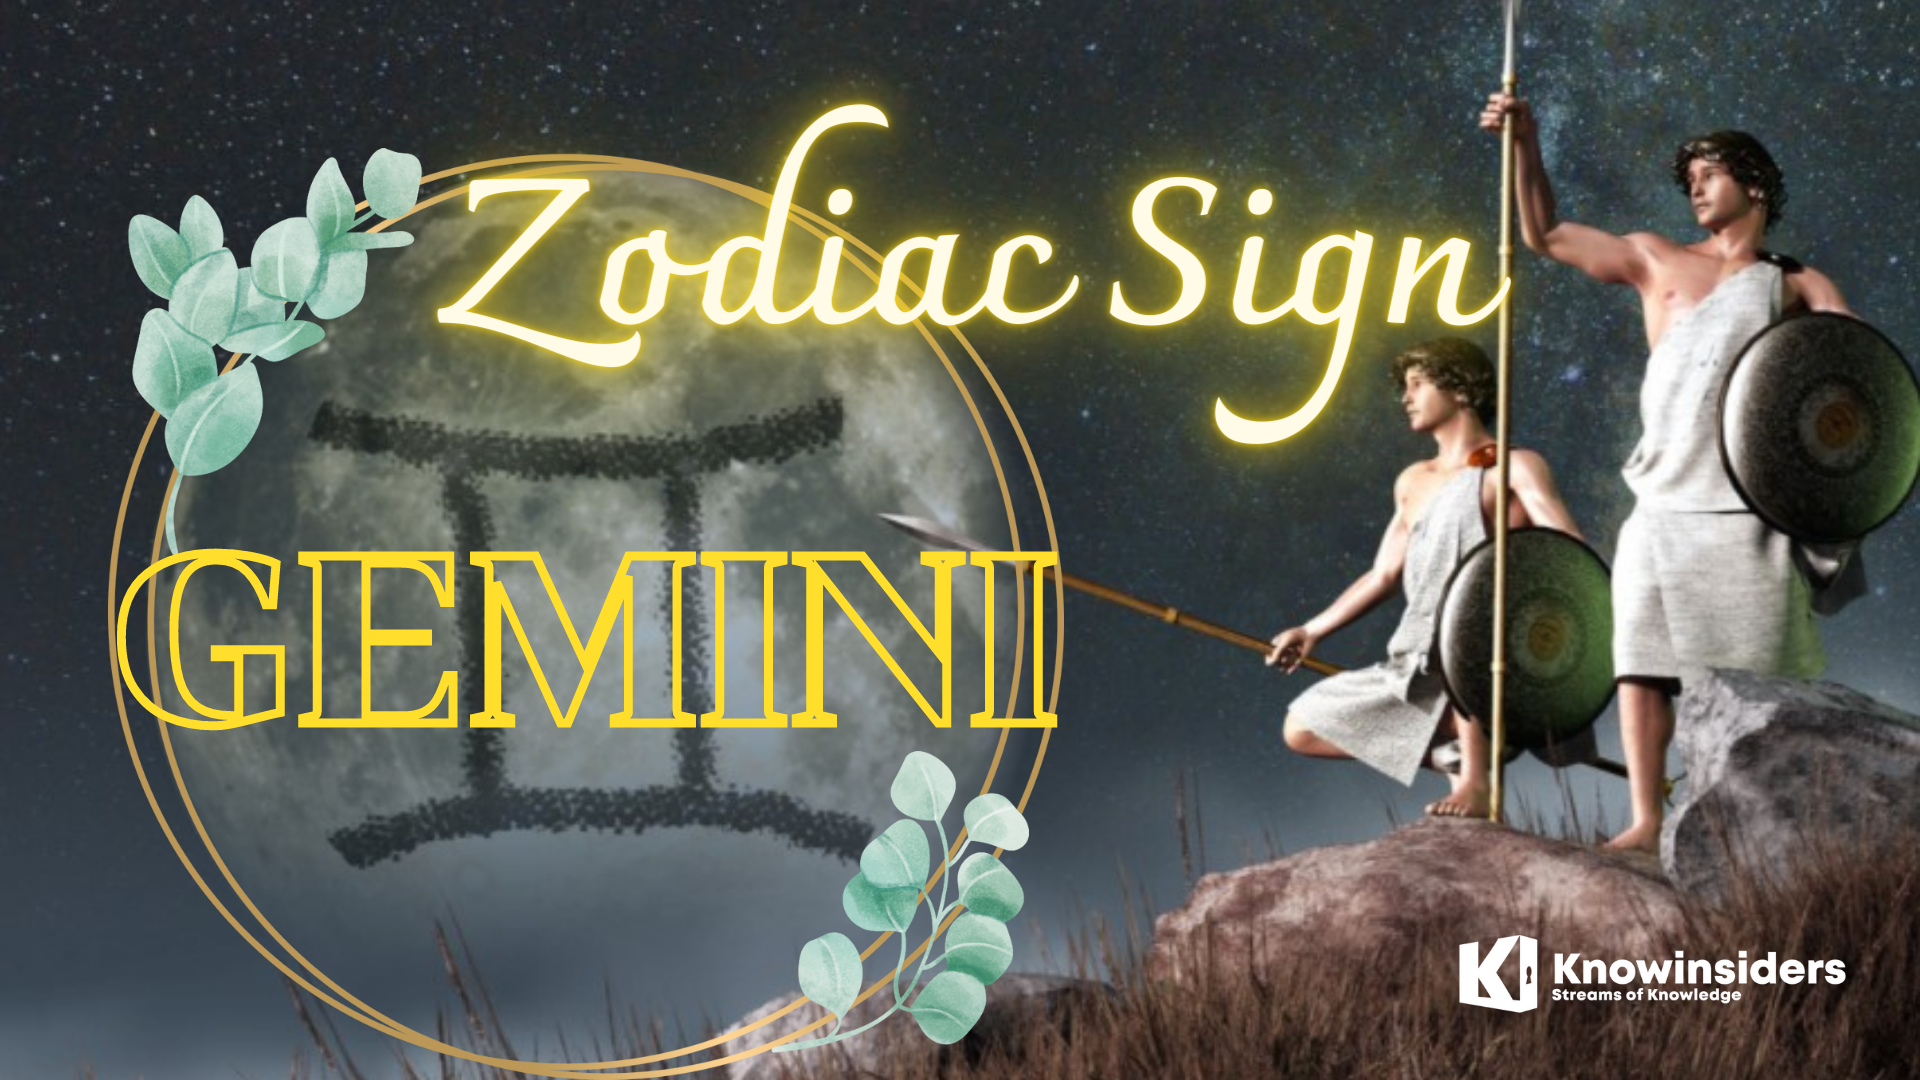 gemini zodiac sign birthday meaning and personal traits